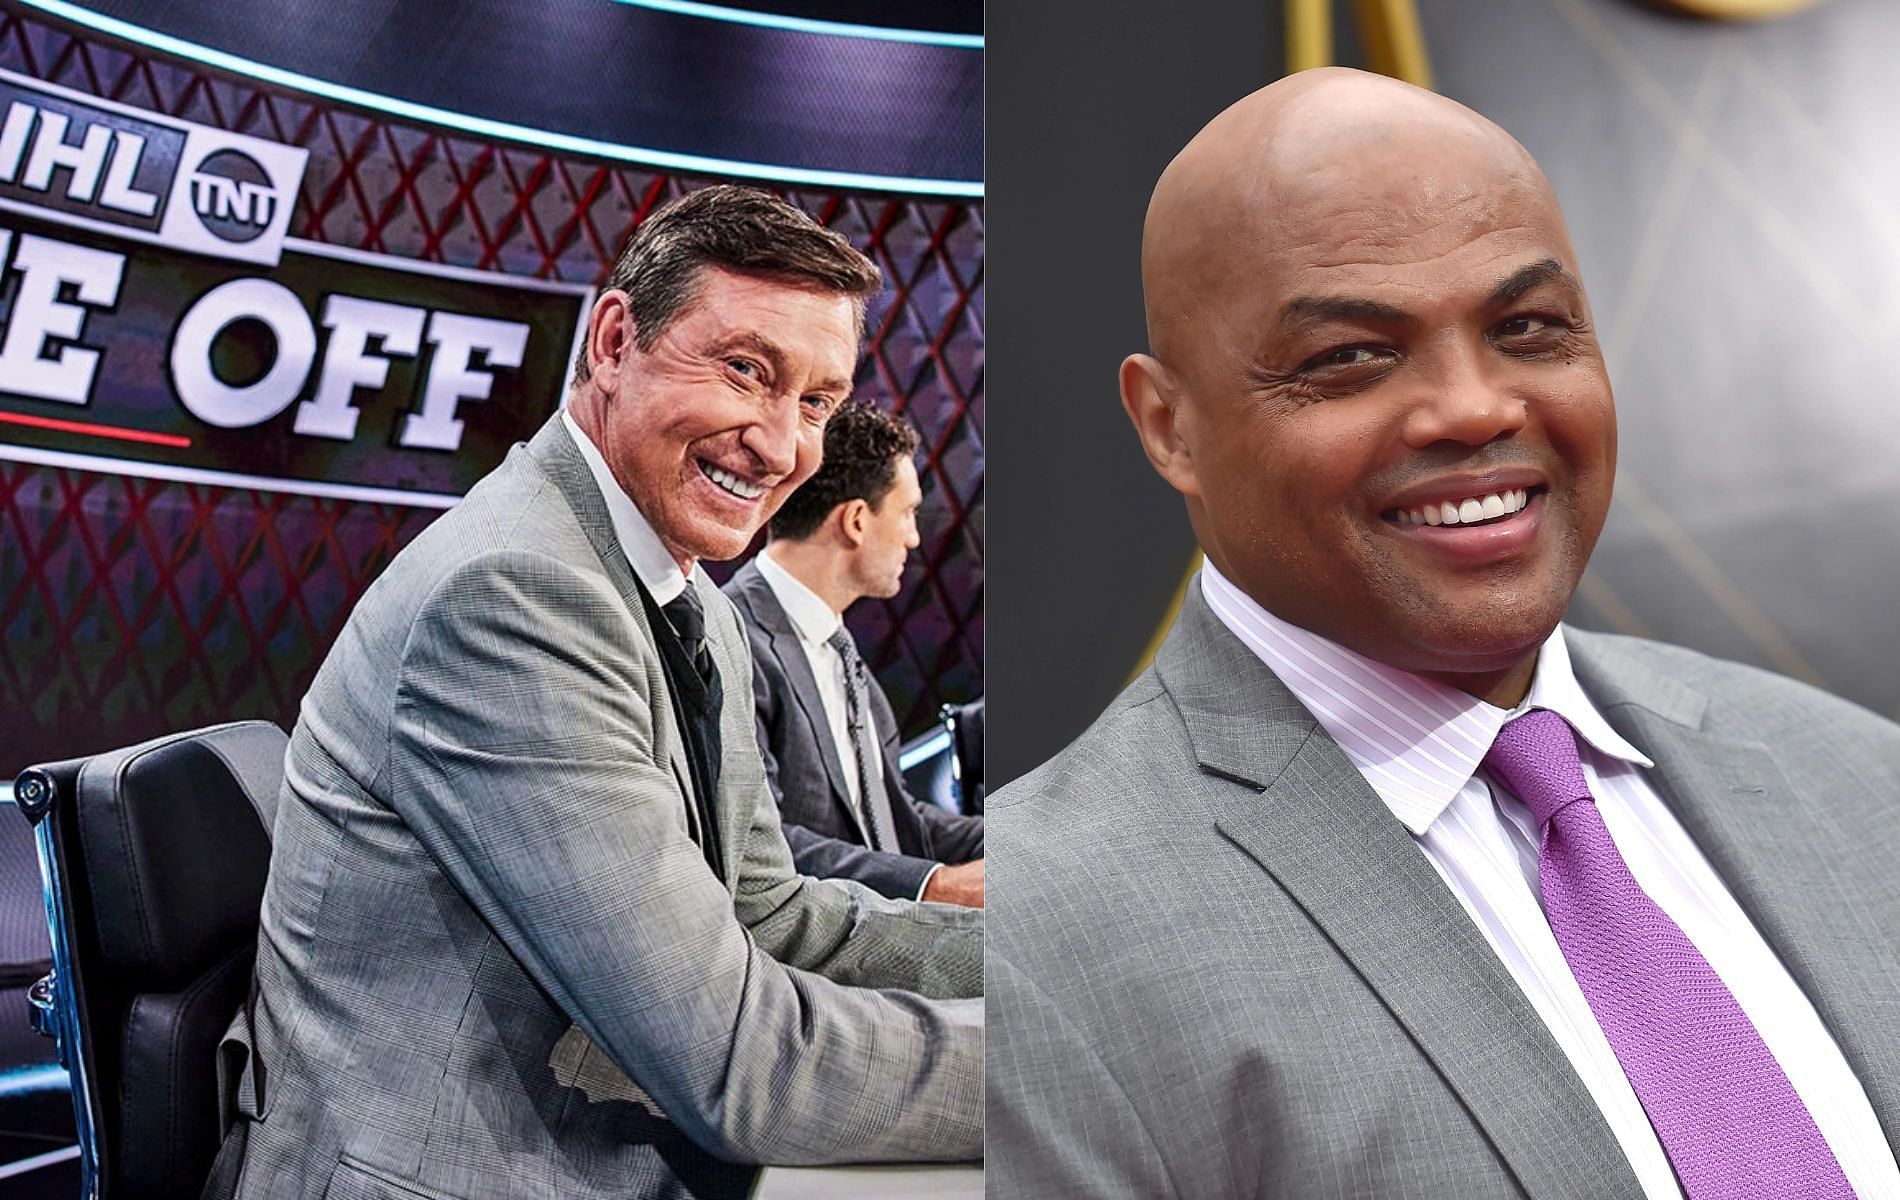 Wayne Gretzky was recruited by Charles Barkley to join NHL on TNT